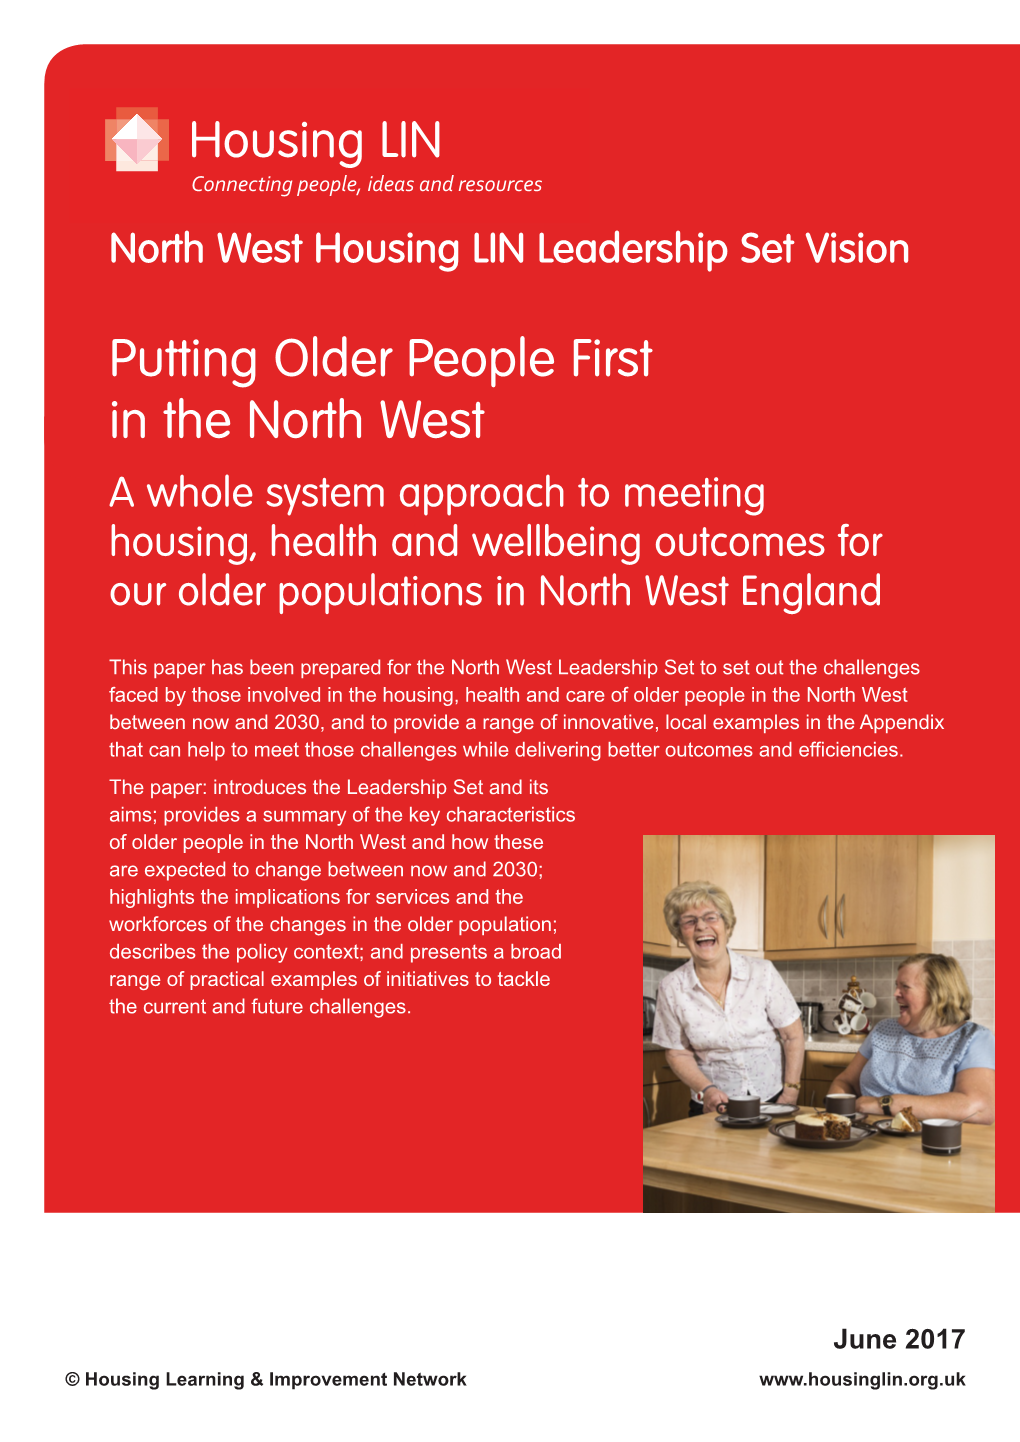 Putting Older People First in the North West a Whole System Approach to Meeting Housing, Health and Wellbeing Outcomes for Our Older Populations in North West England